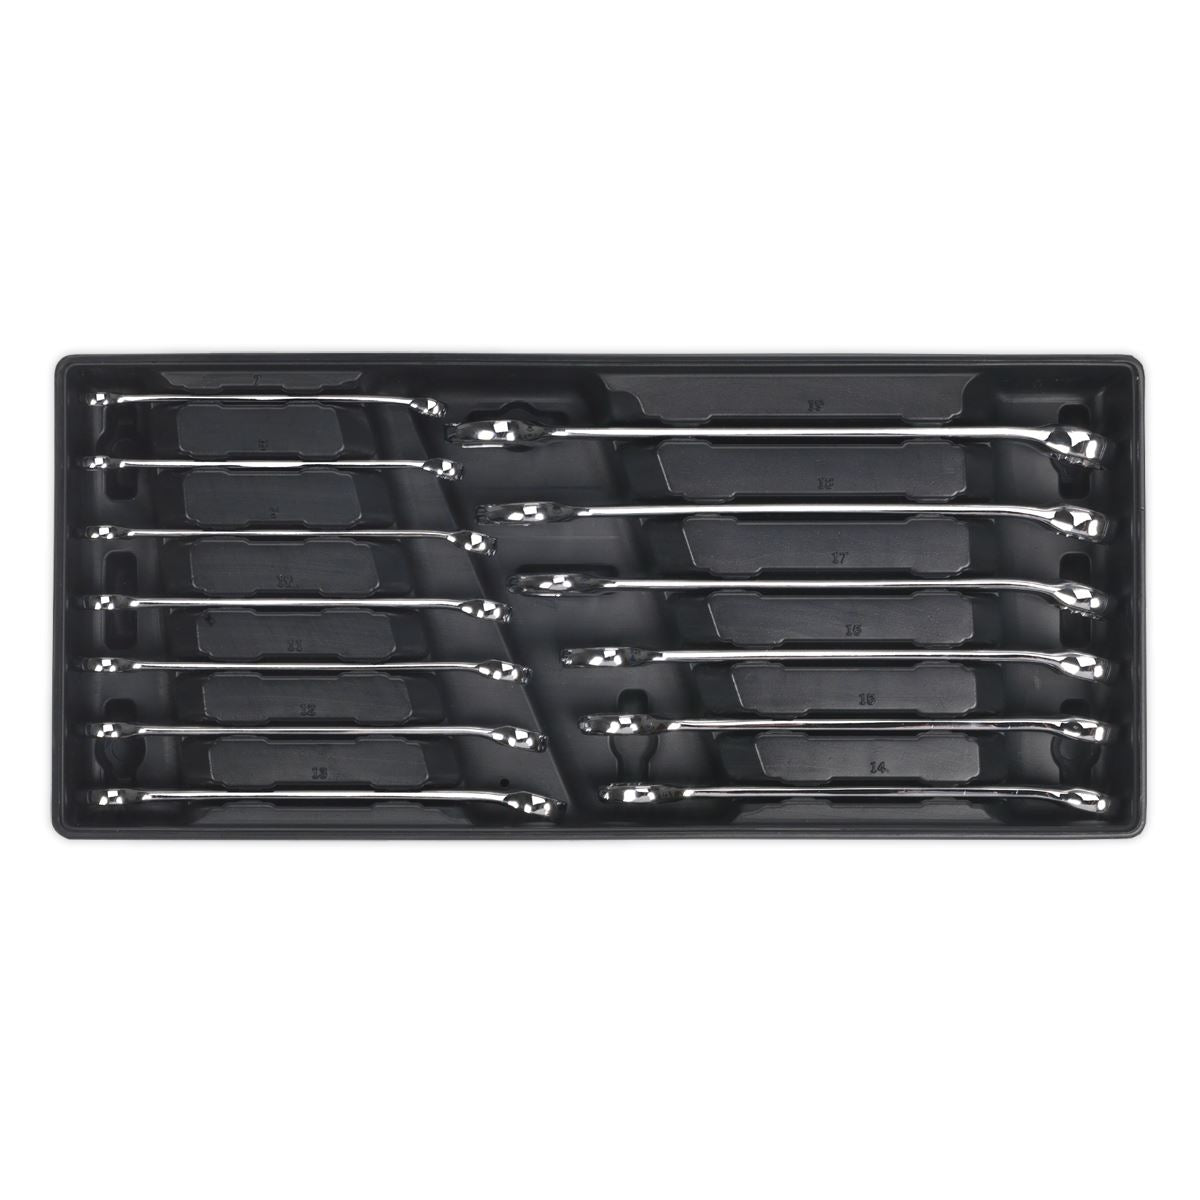 Sealey Premier Tool Tray with Combination Spanner Set 13pc Metric